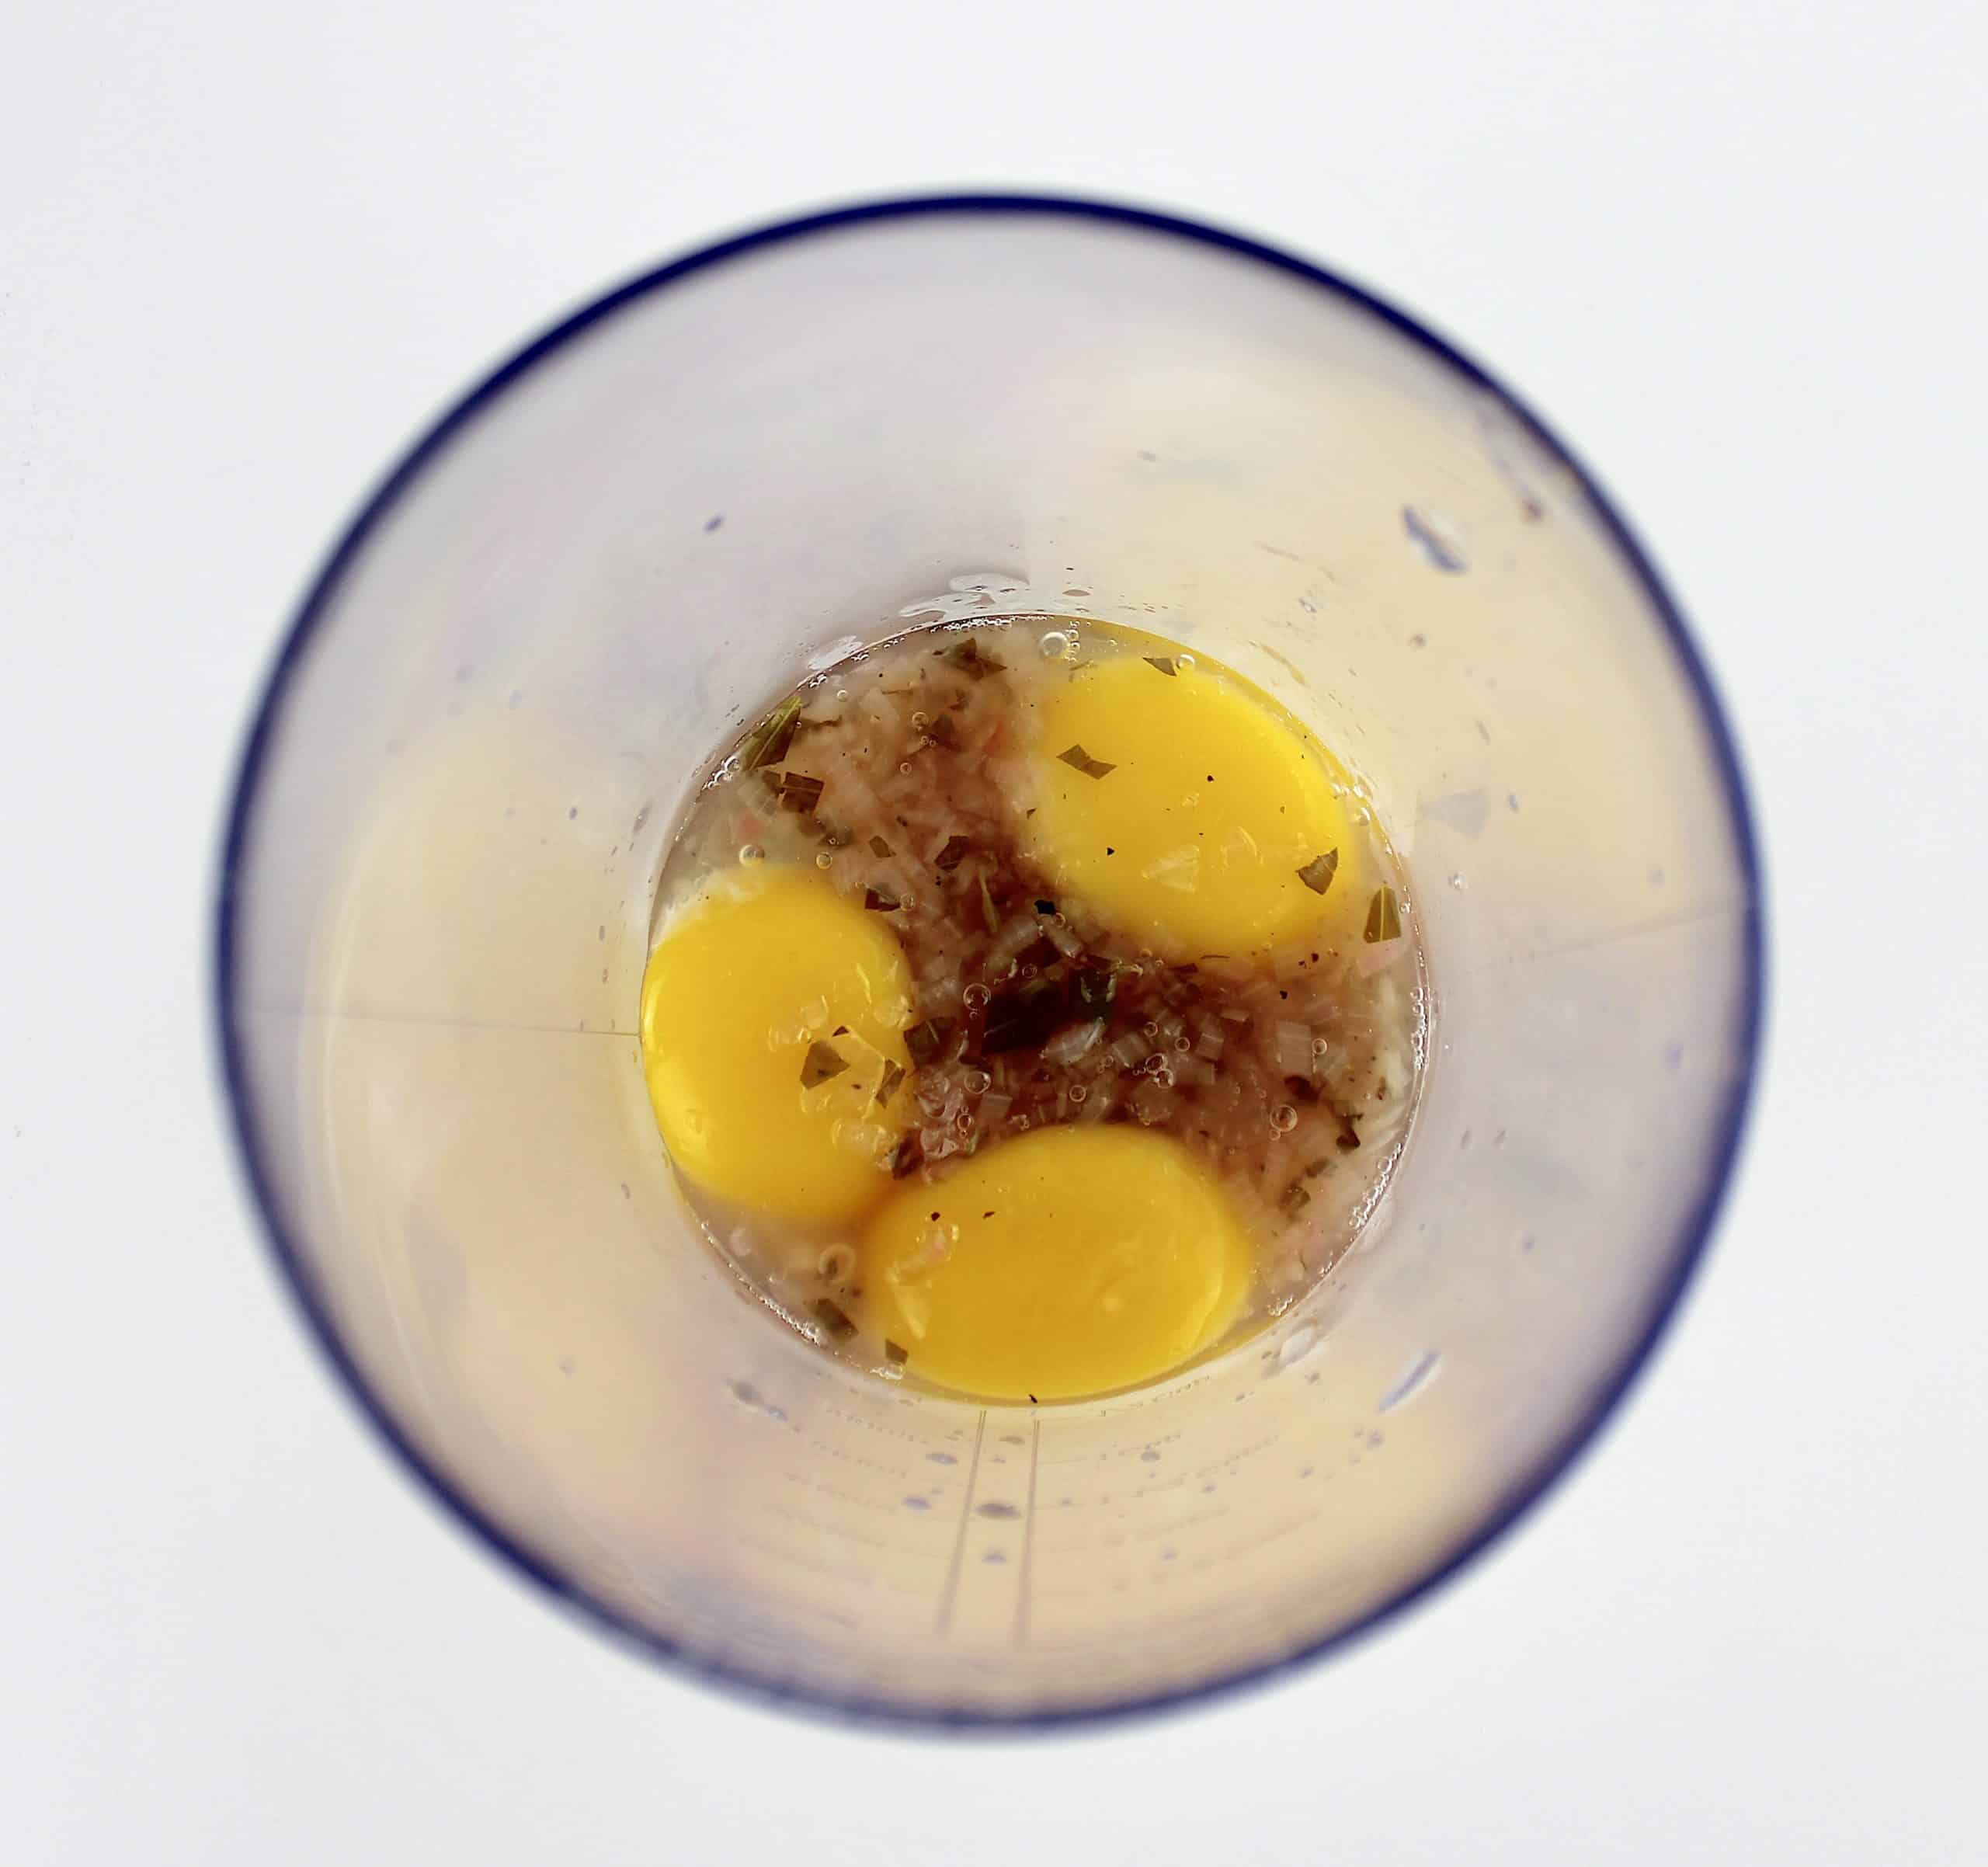 shallot wine reduction with 3 egg yolks in cup